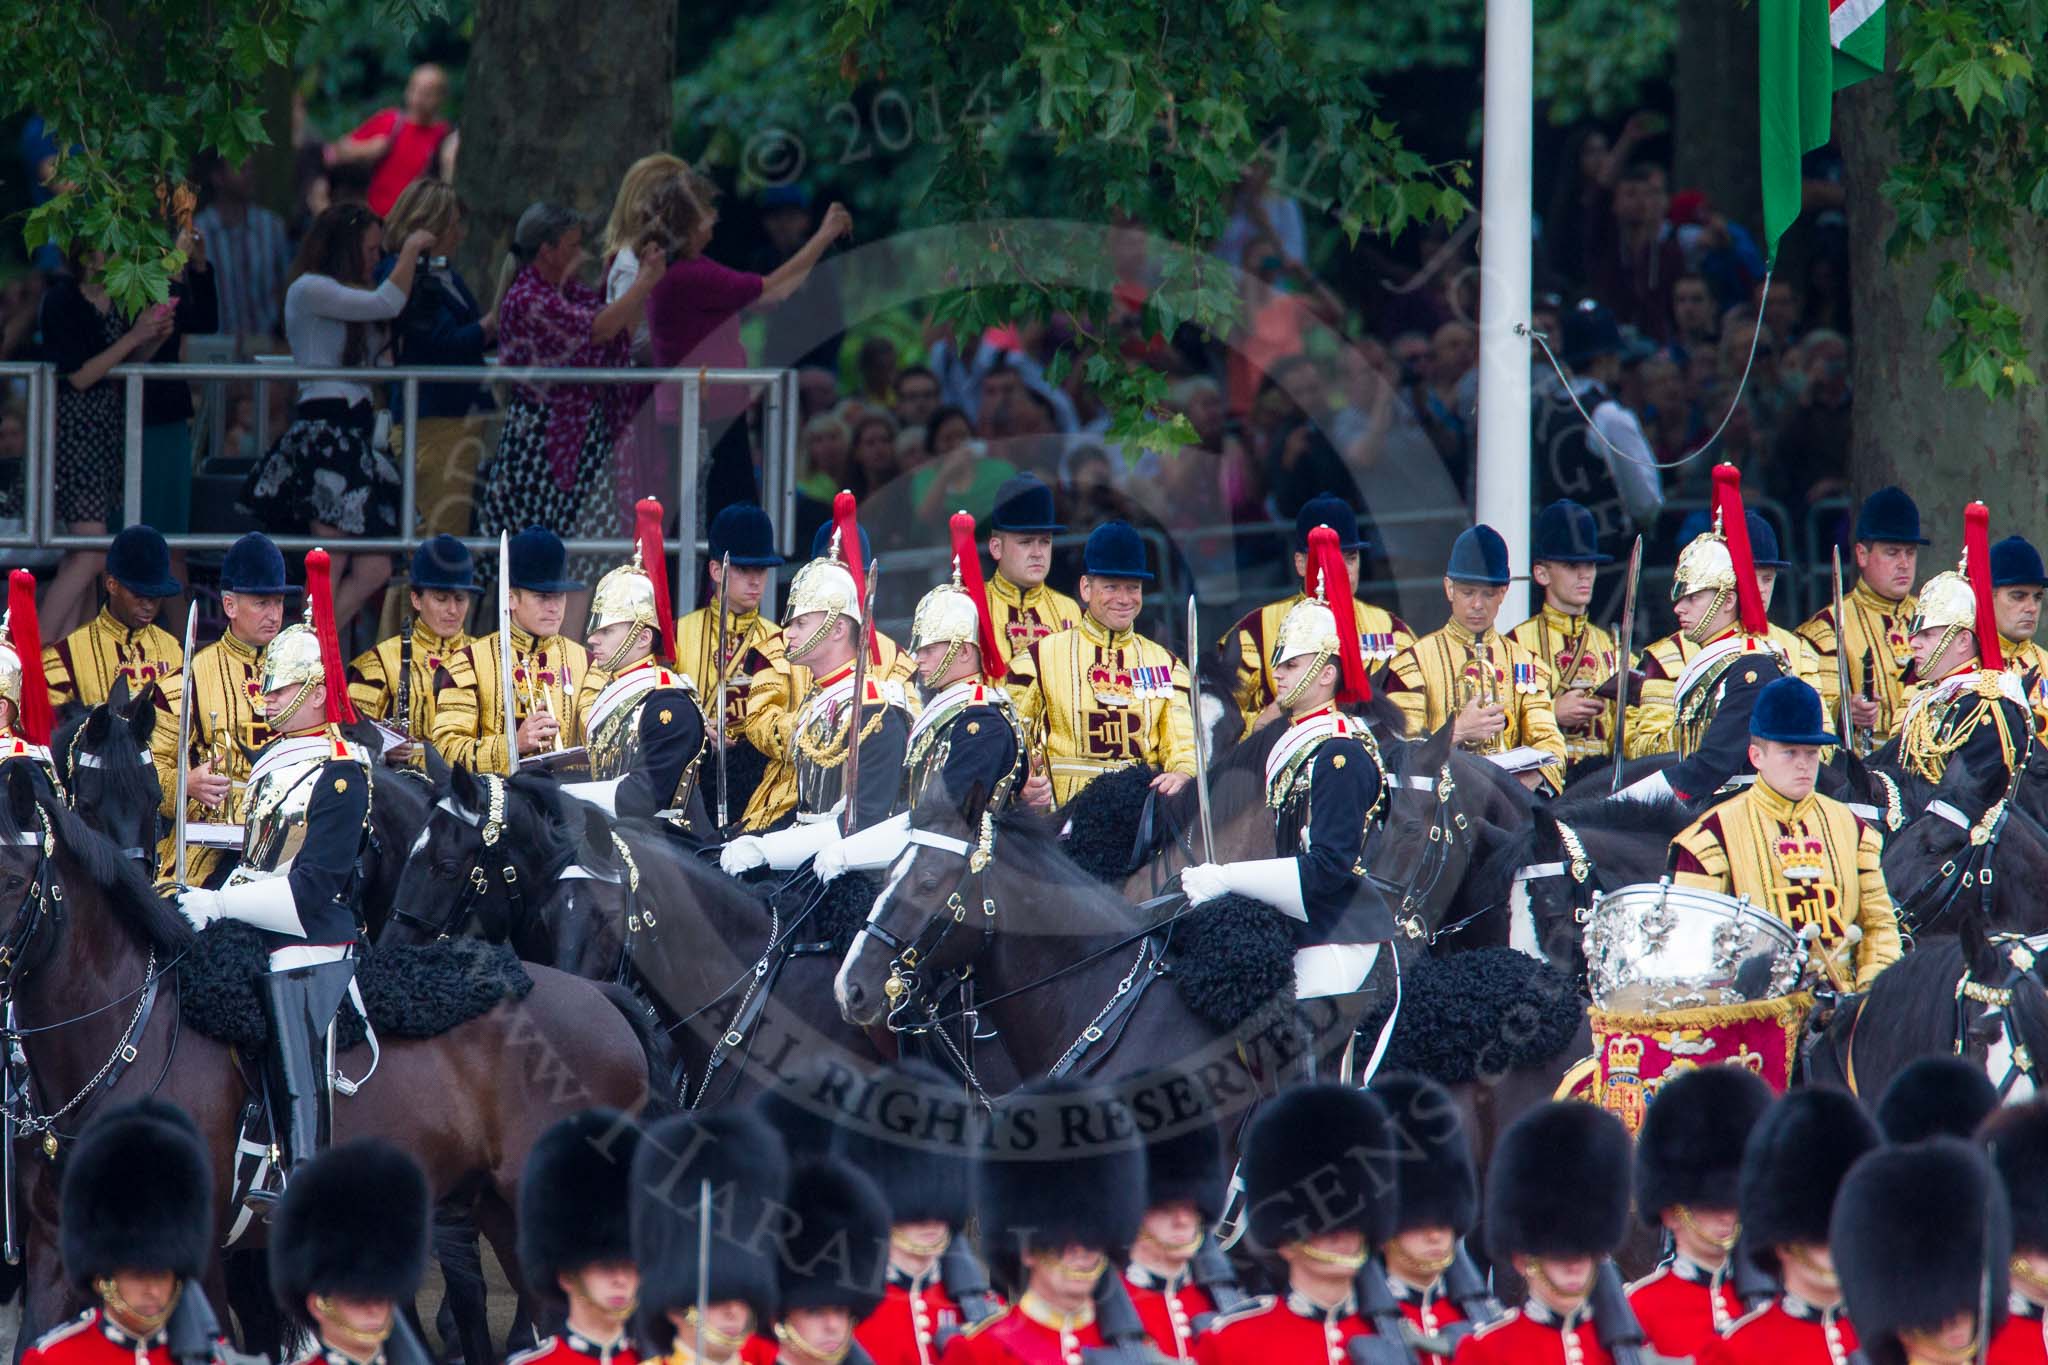 Trooping the Colour 2014.
Horse Guards Parade, Westminster,
London SW1A,

United Kingdom,
on 14 June 2014 at 10:57, image #332